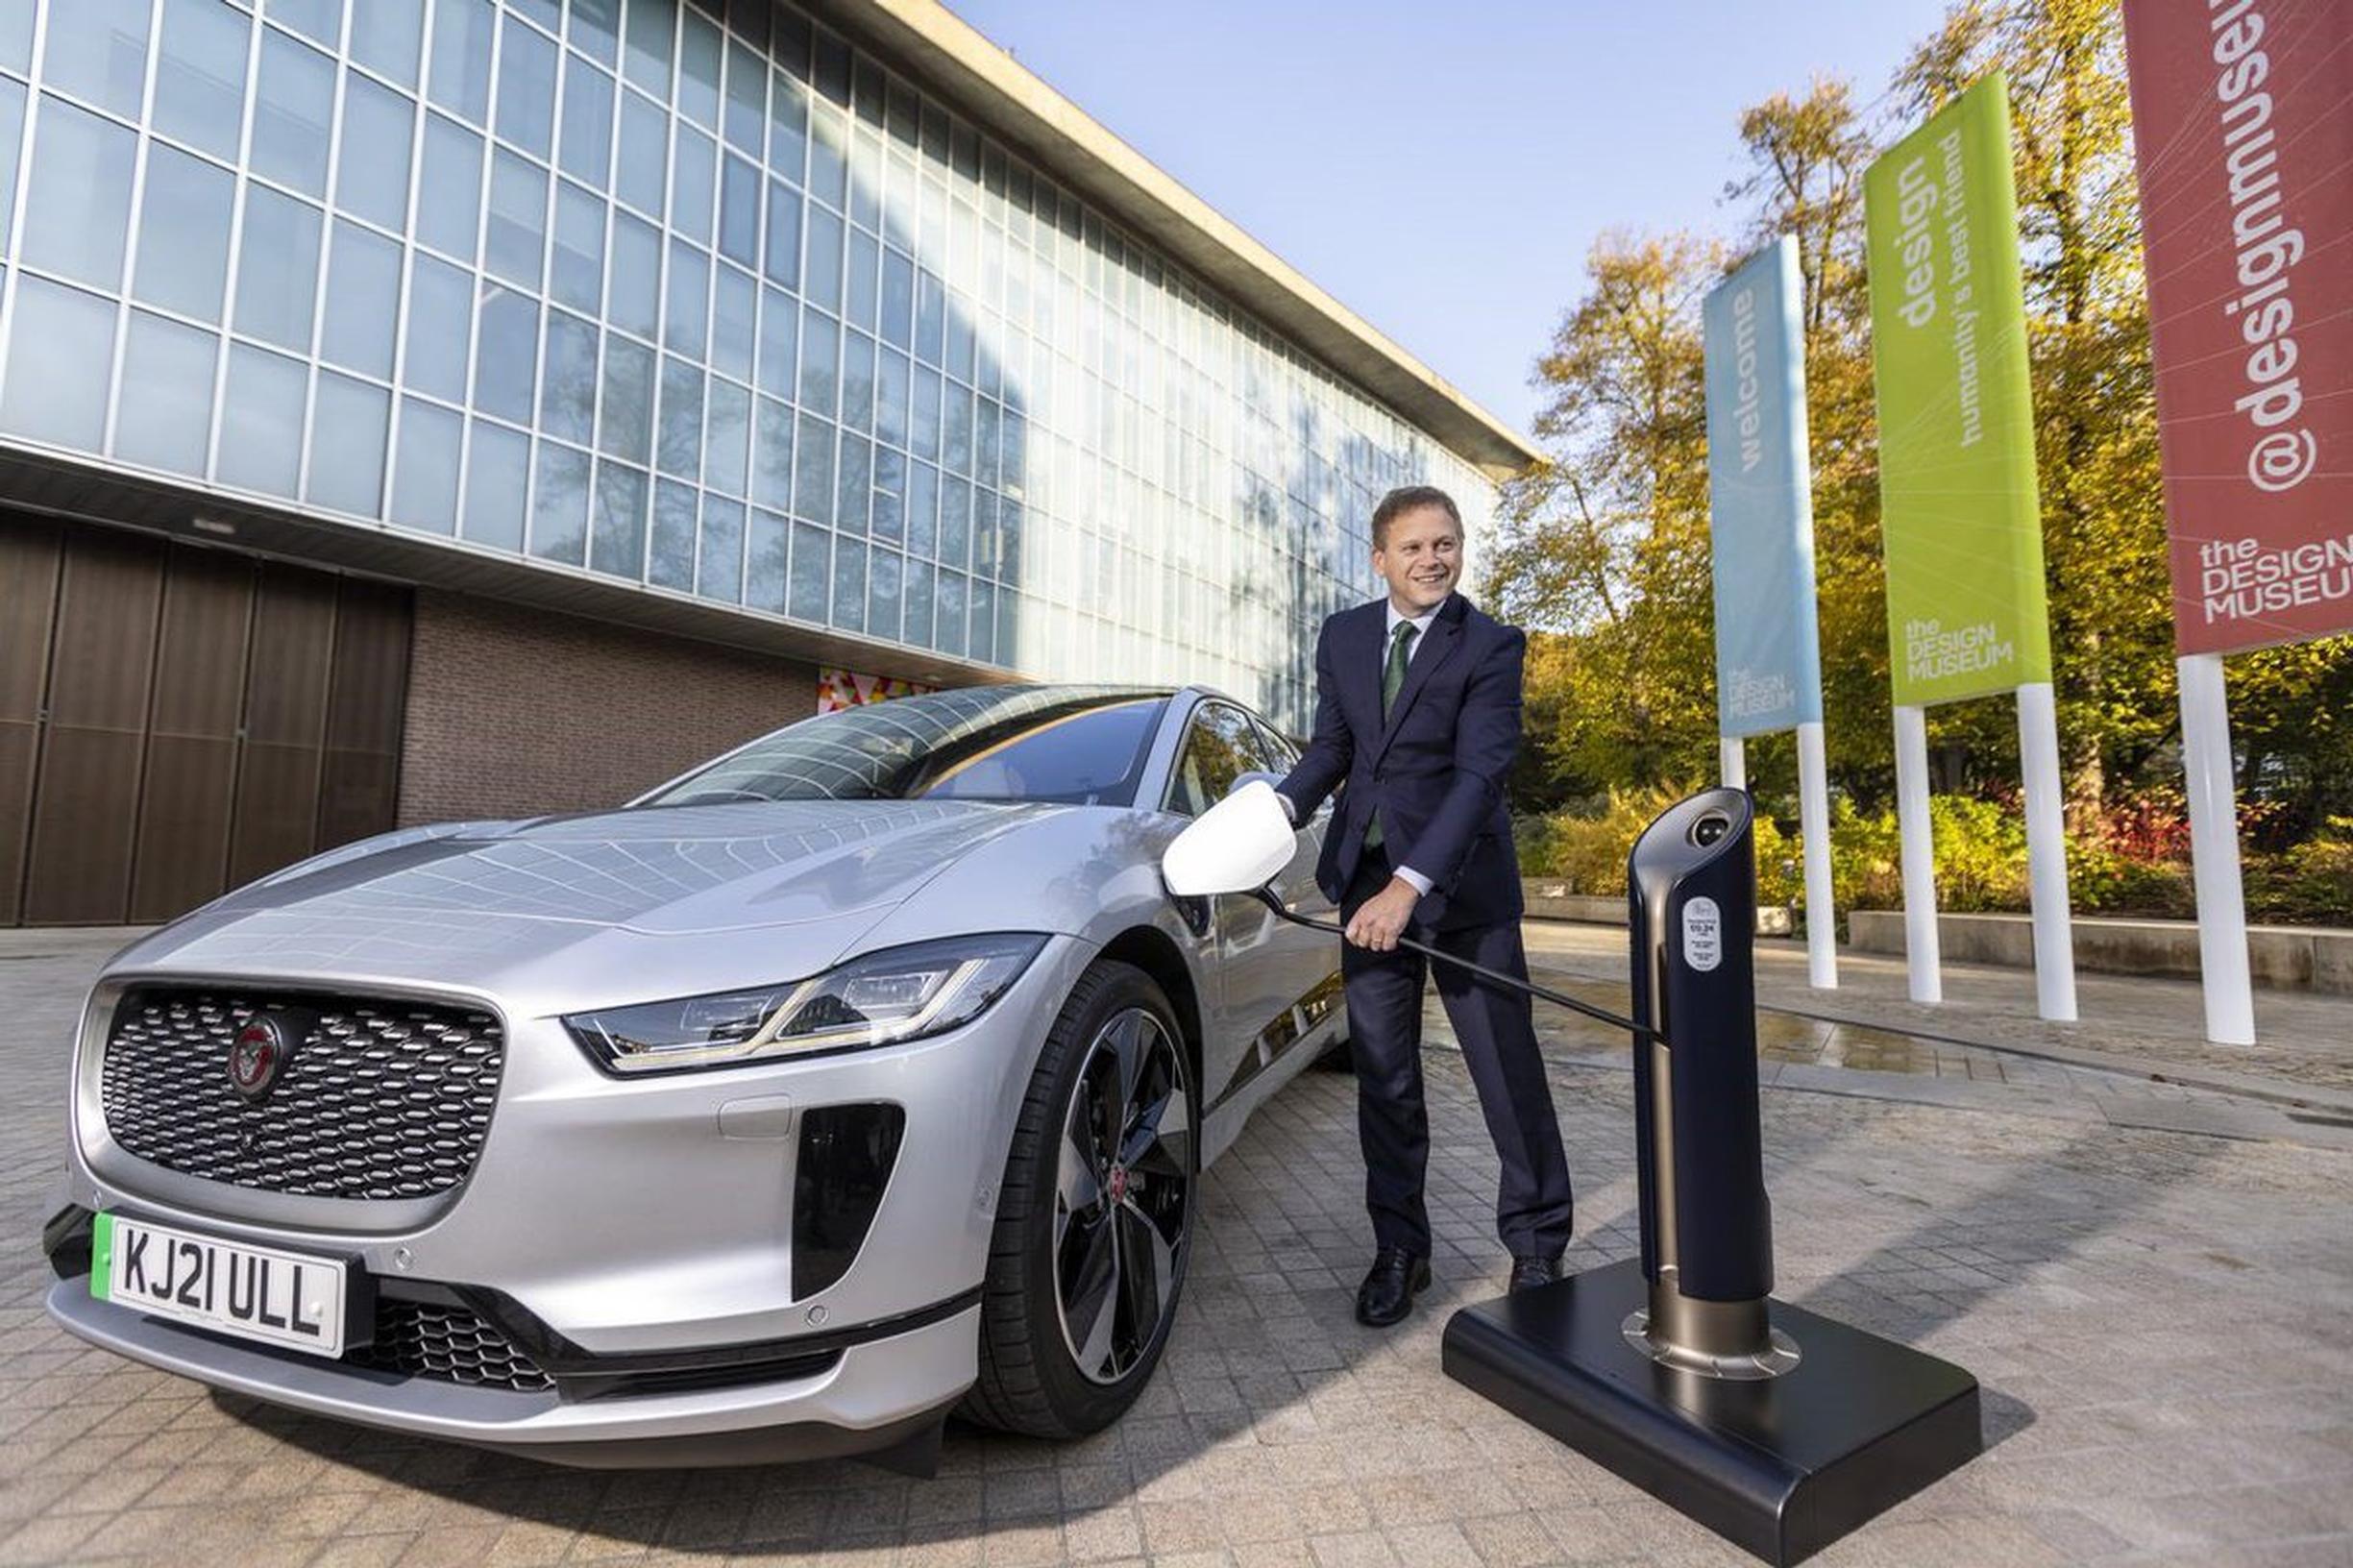 Transport secretary Grant Shapps unveils the new chargepoint designed by the Royal College of Art and PA Consulting